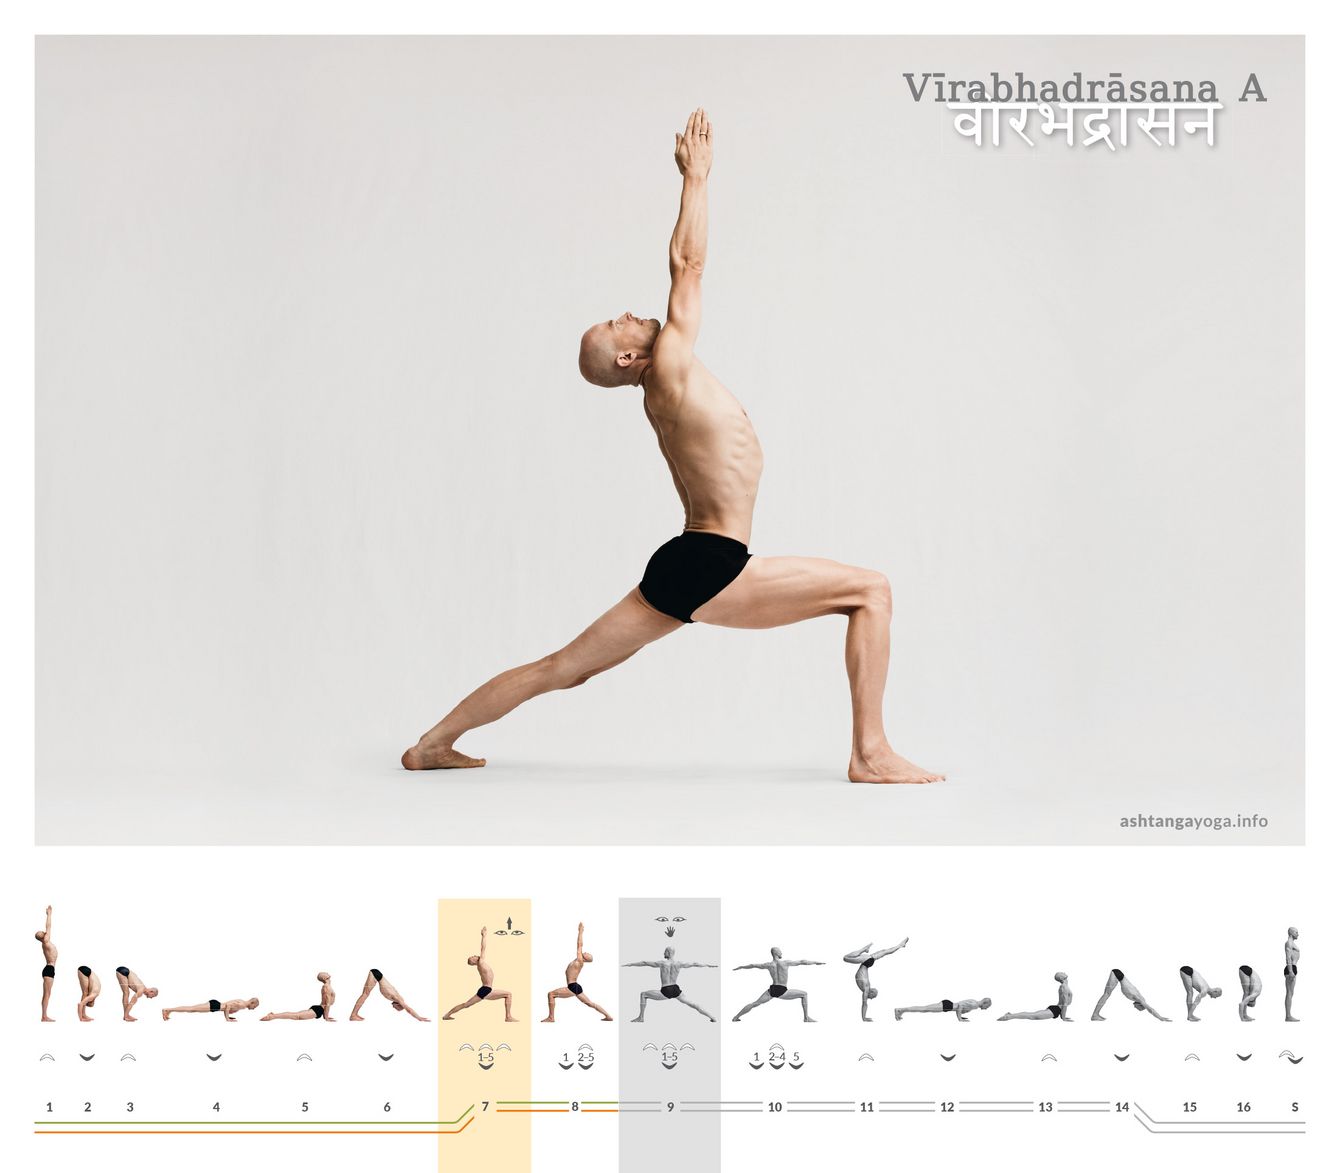 The "powerful warrior pose“ is reminiscent of base moves or postures found in a variety of martial arts. In the version - Virabhadrasana, the arms are raised upwards.